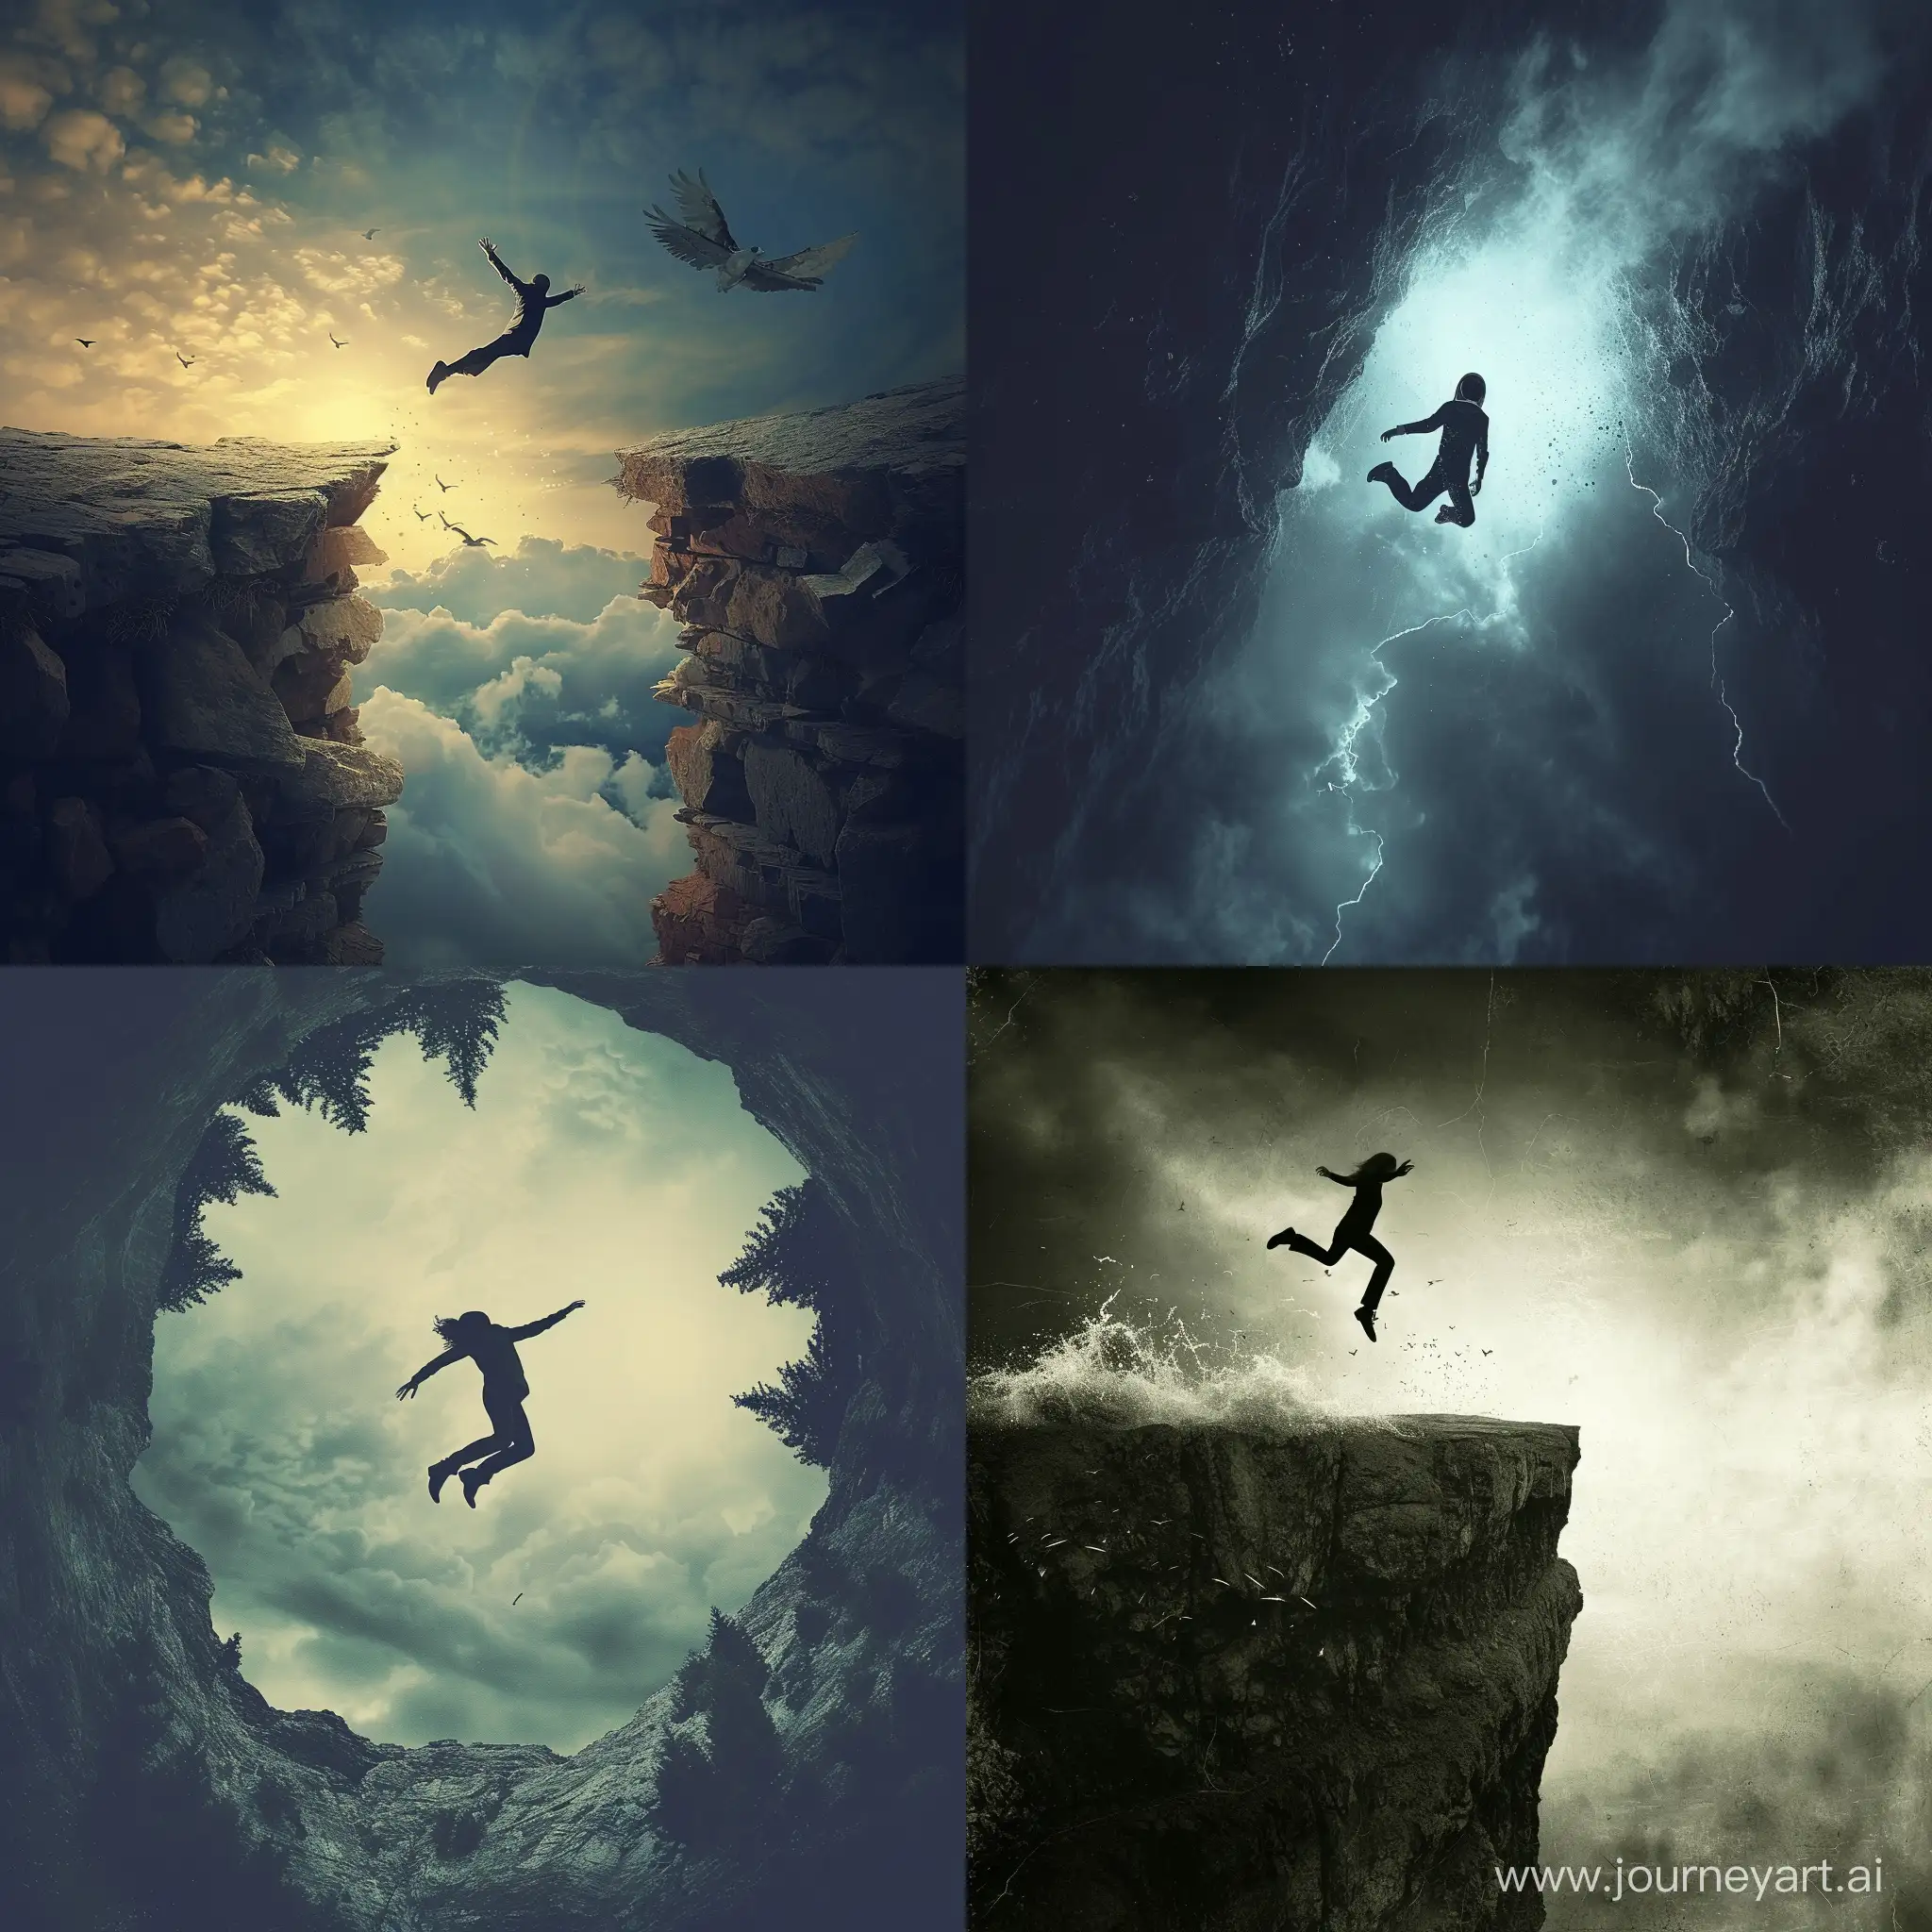 Courageous-Leap-into-Despair-Abstract-Art-with-Human-Figure